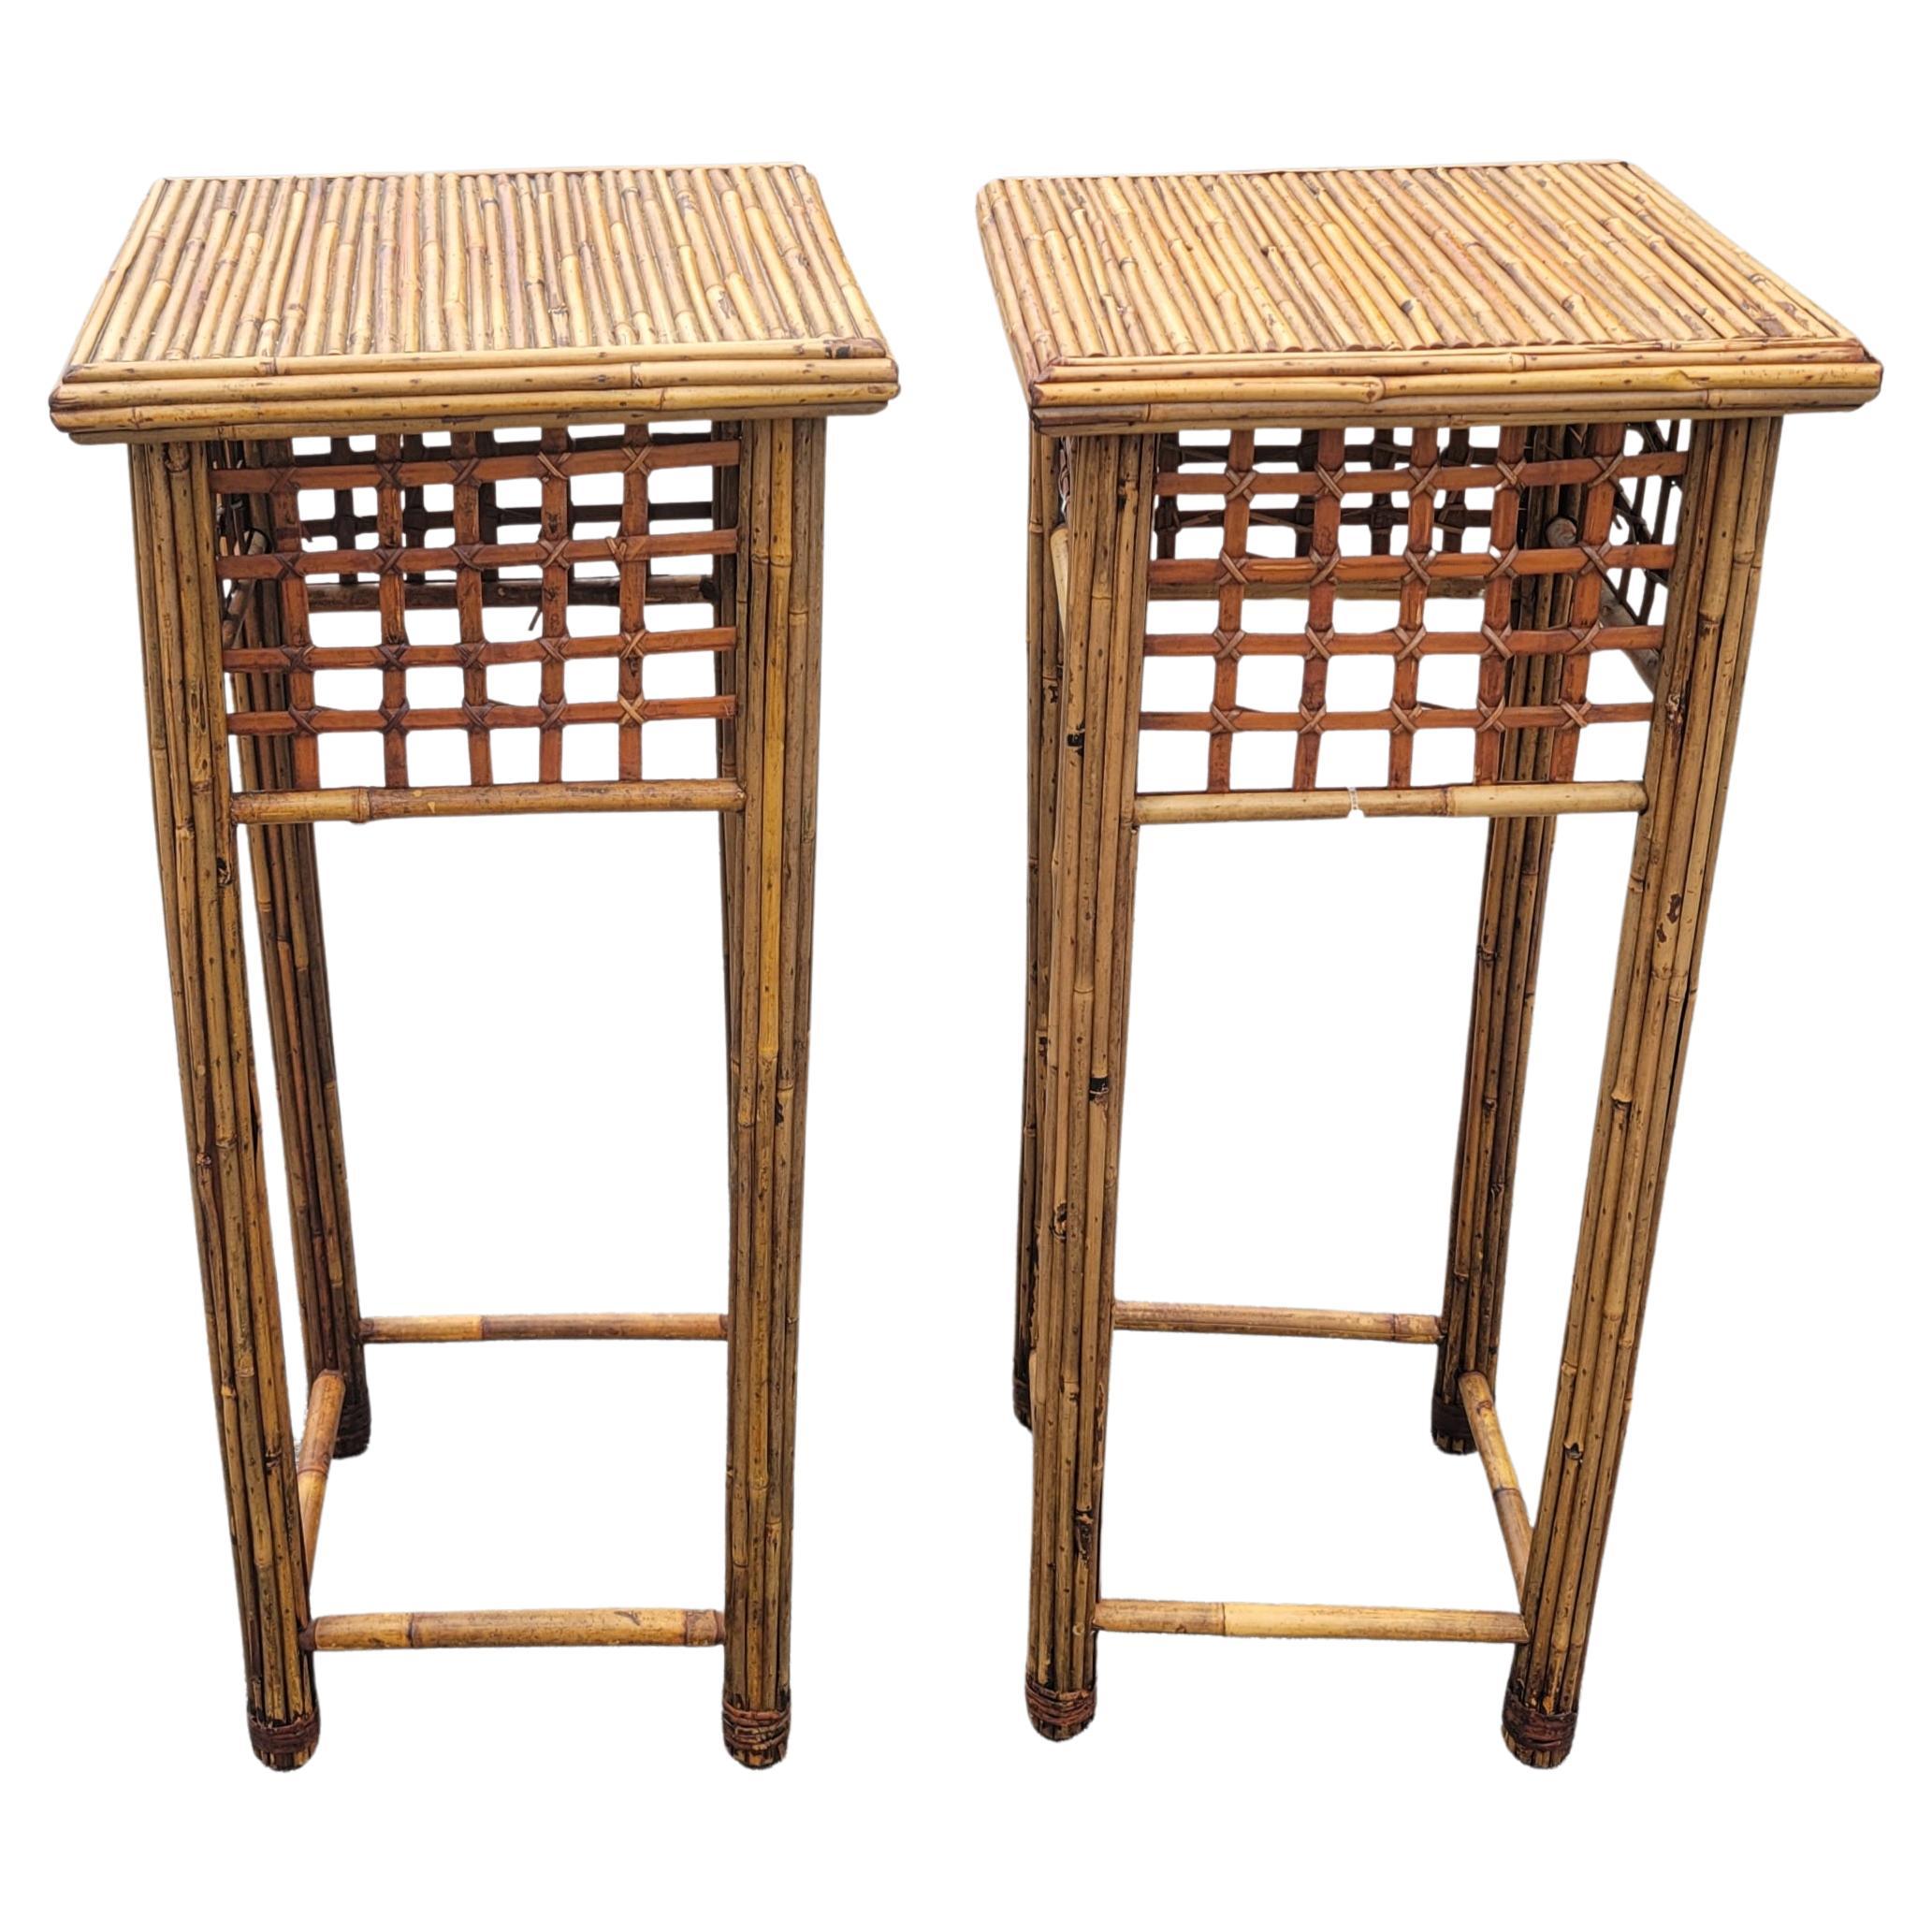 1970s Vintage Stacked Bamboo Pedestals Plant Stands, a Pair